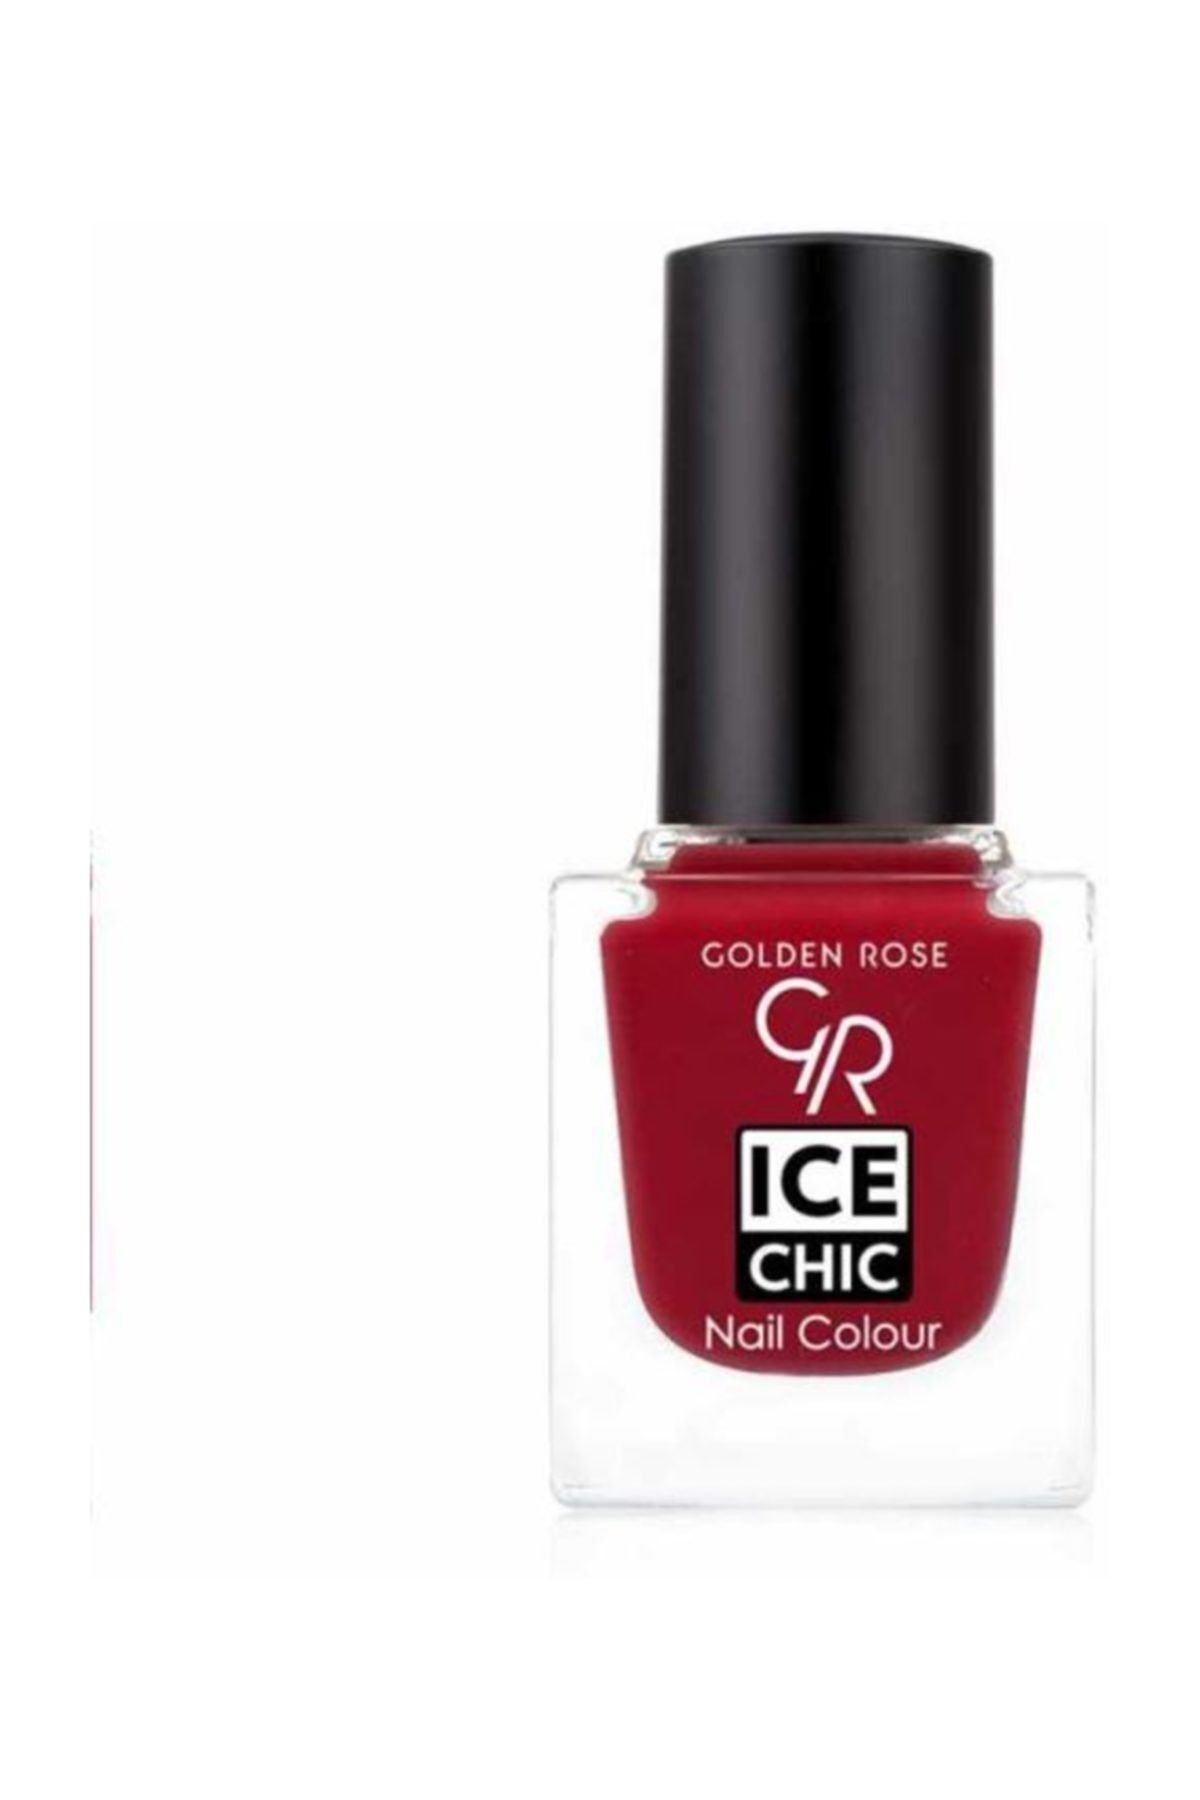 Golden Rose Ice Chic Nail Colour 38 10.5 ml